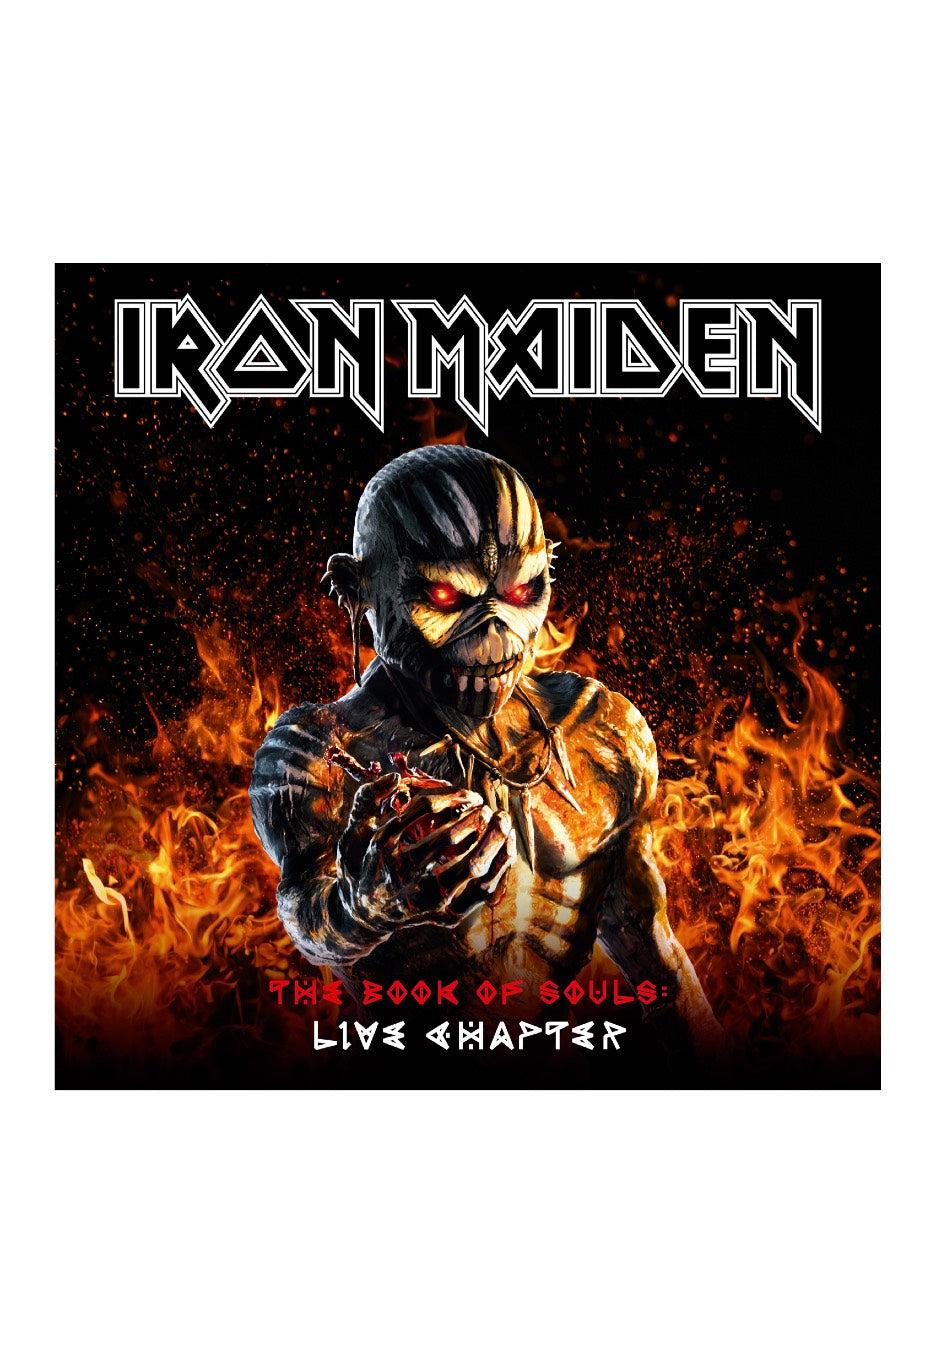 Iron Maiden - The Book Of Souls: Live Chapter - 2 CD